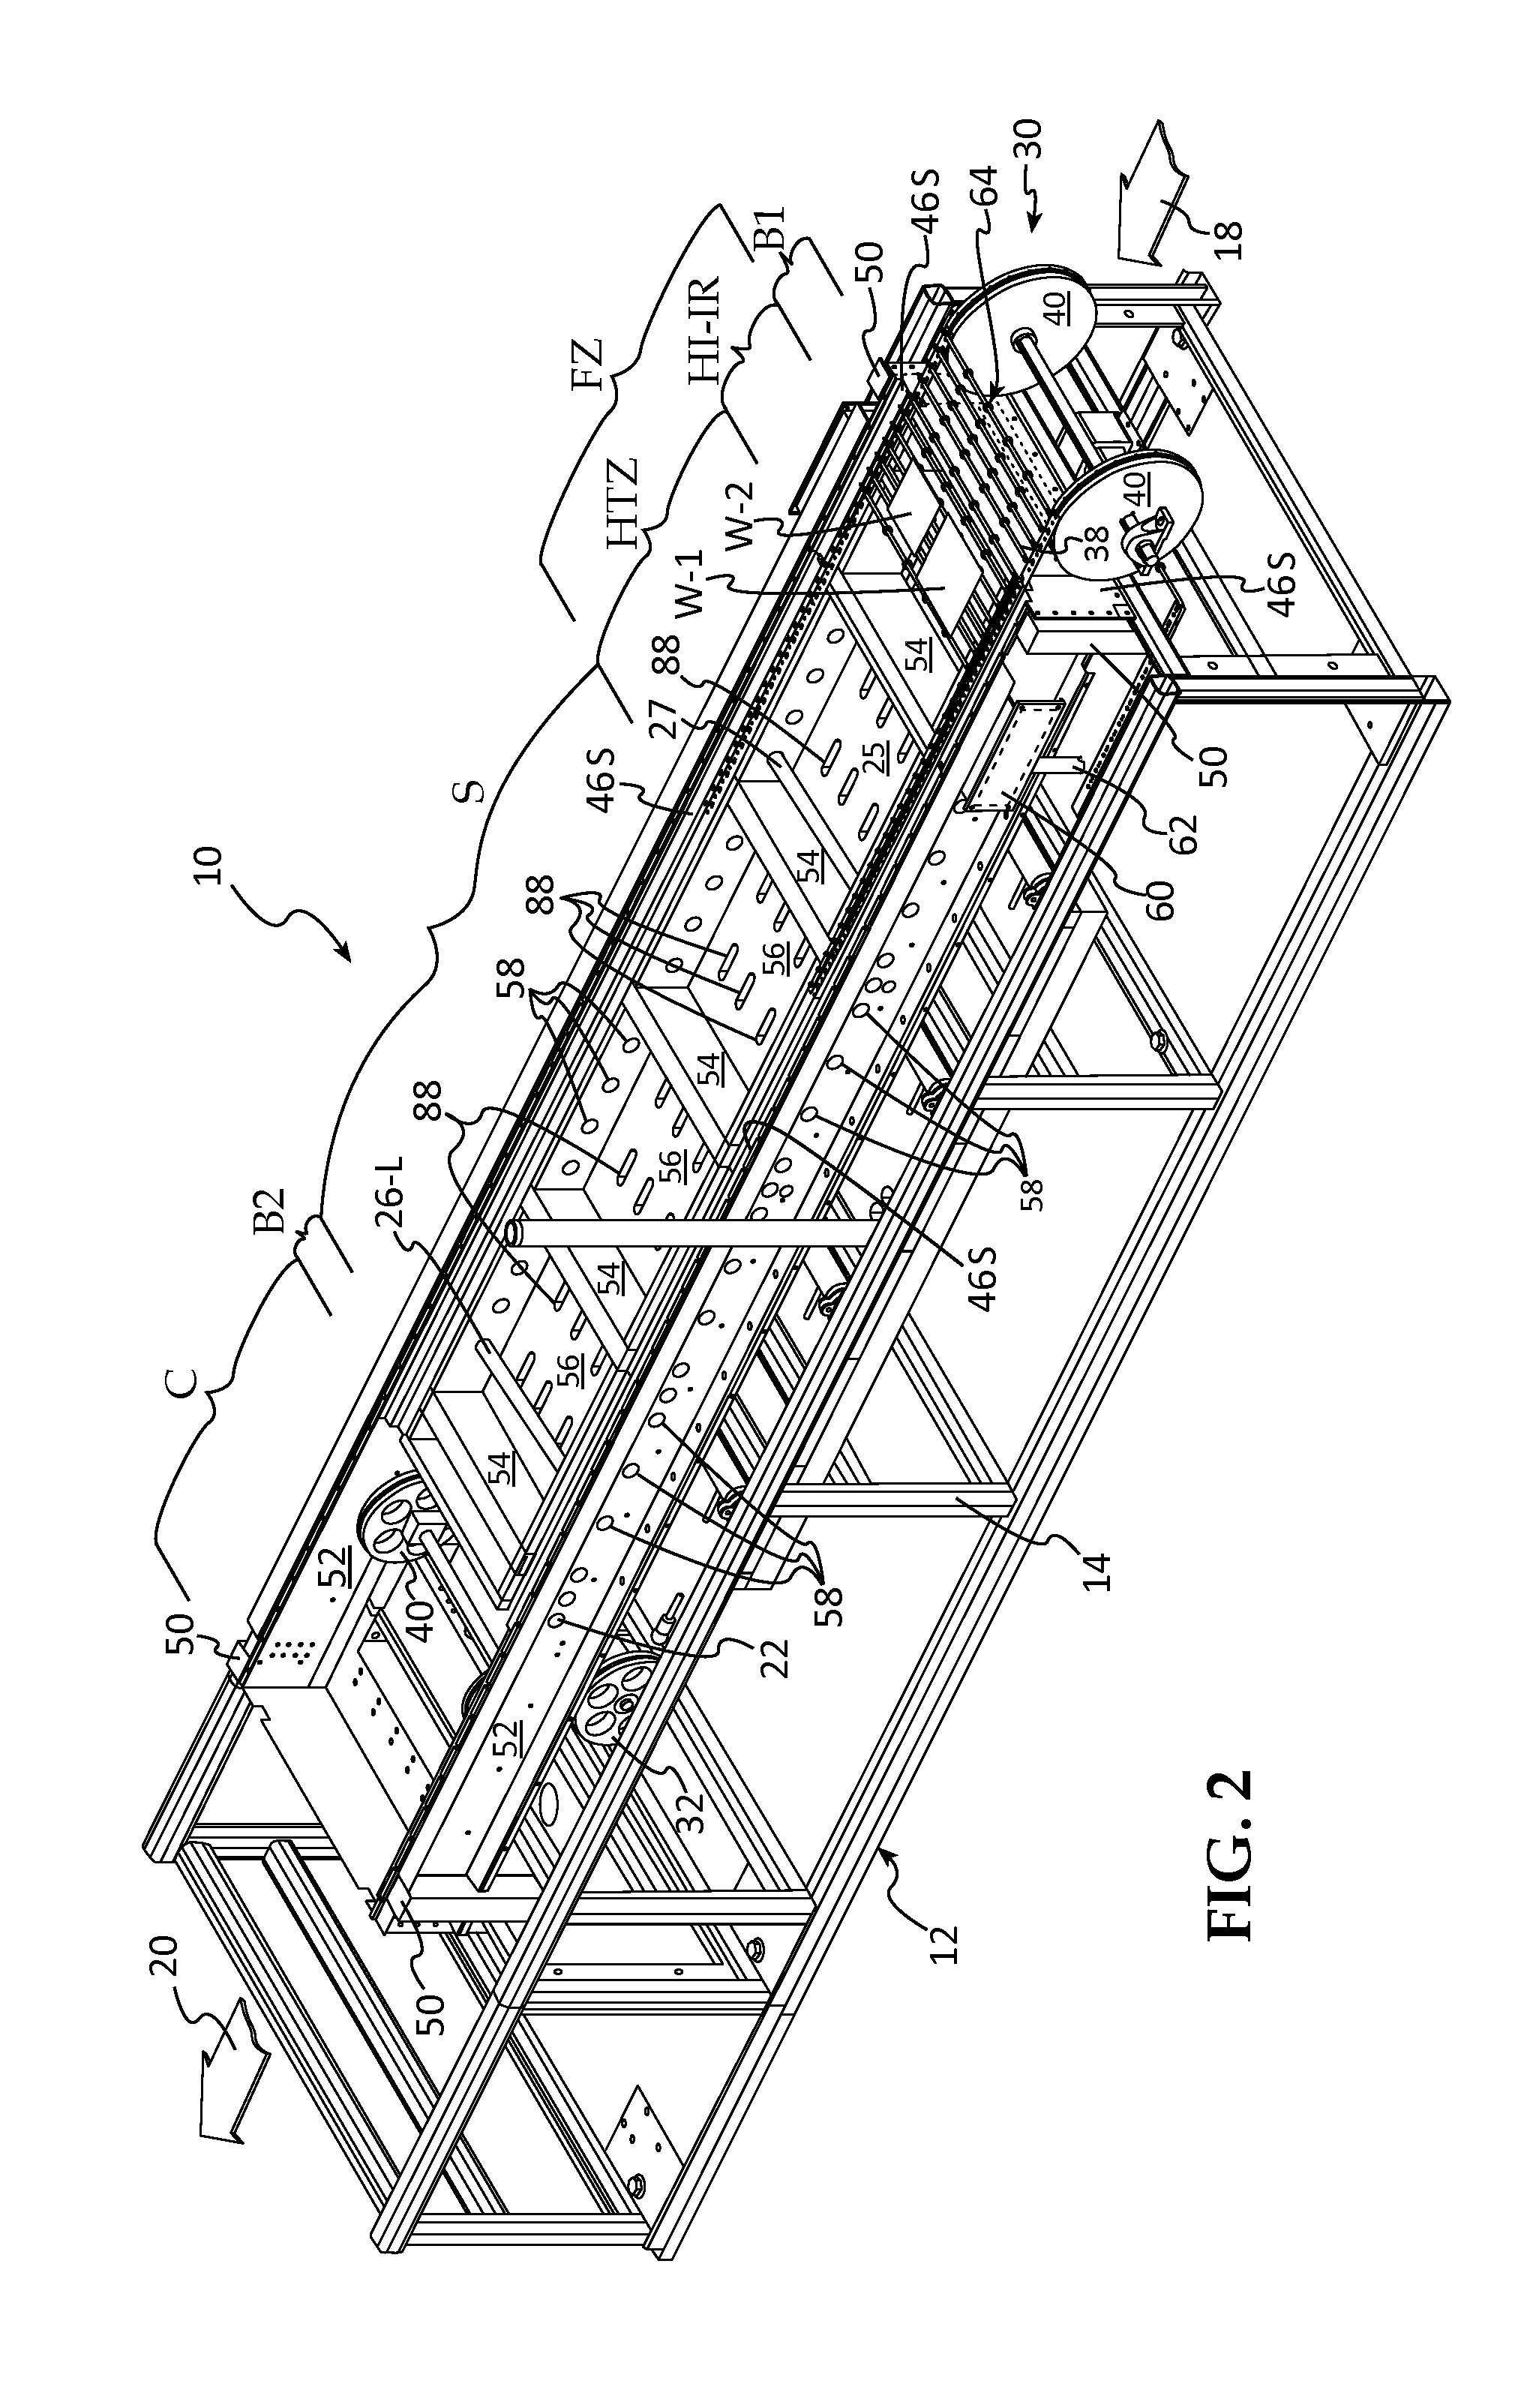 Diffusion furnaces employing ultra low mass transport systems and methods of wafer rapid diffusion processing